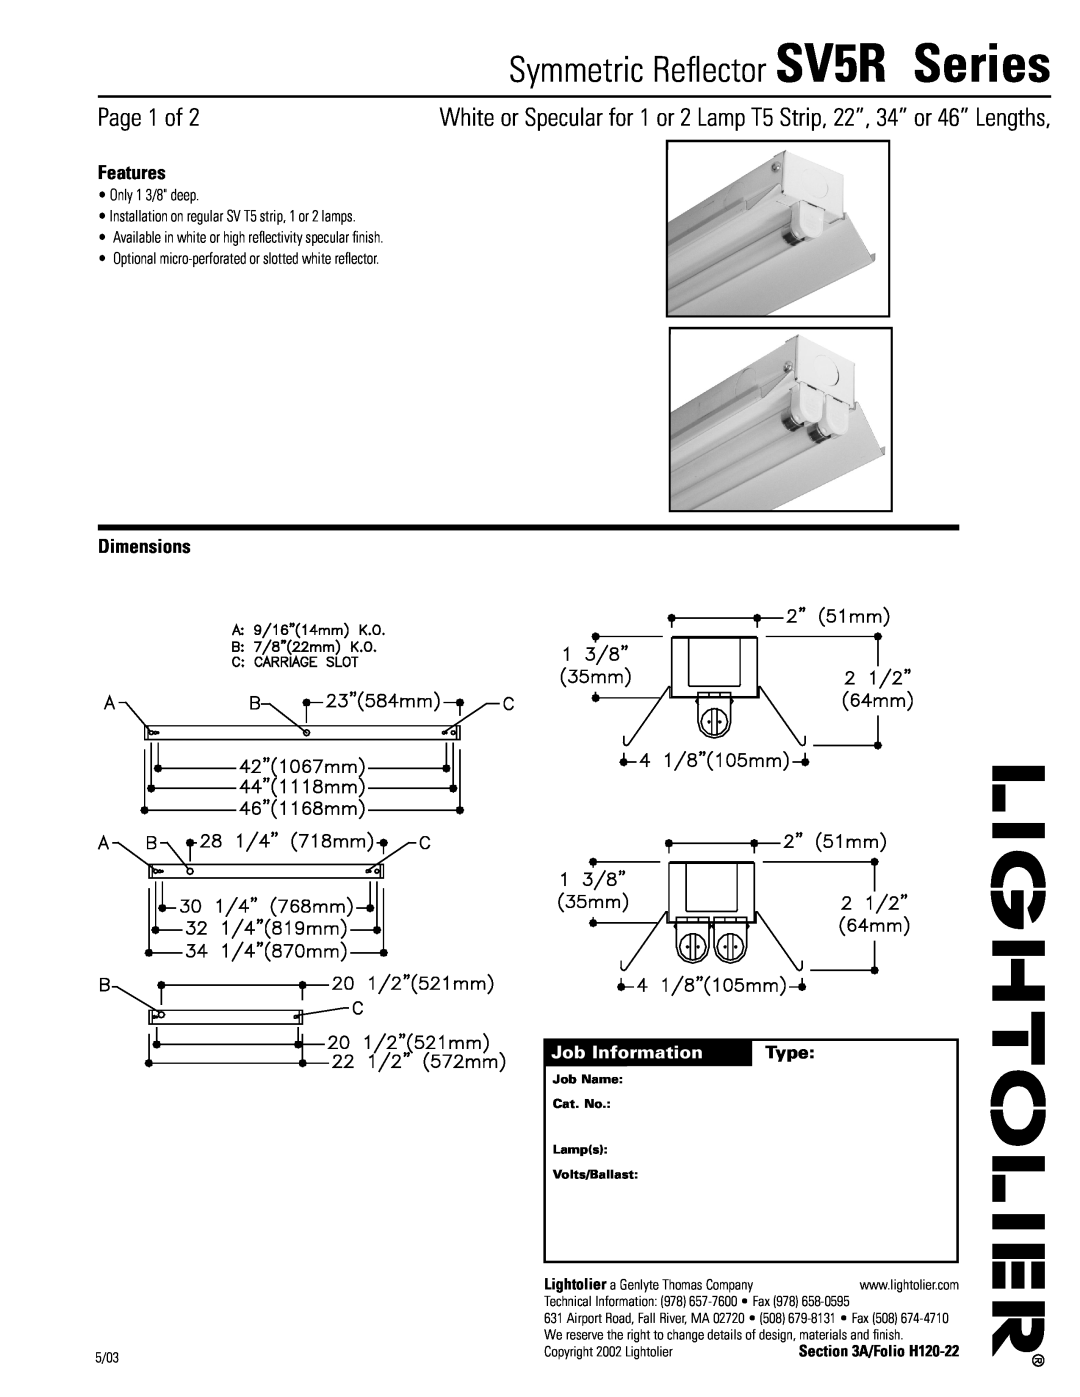 Lightolier SV5R Series dimensions Page 1 of, Features, Dimensions, Job Information, Type, Copyright 2002 Lightolier 